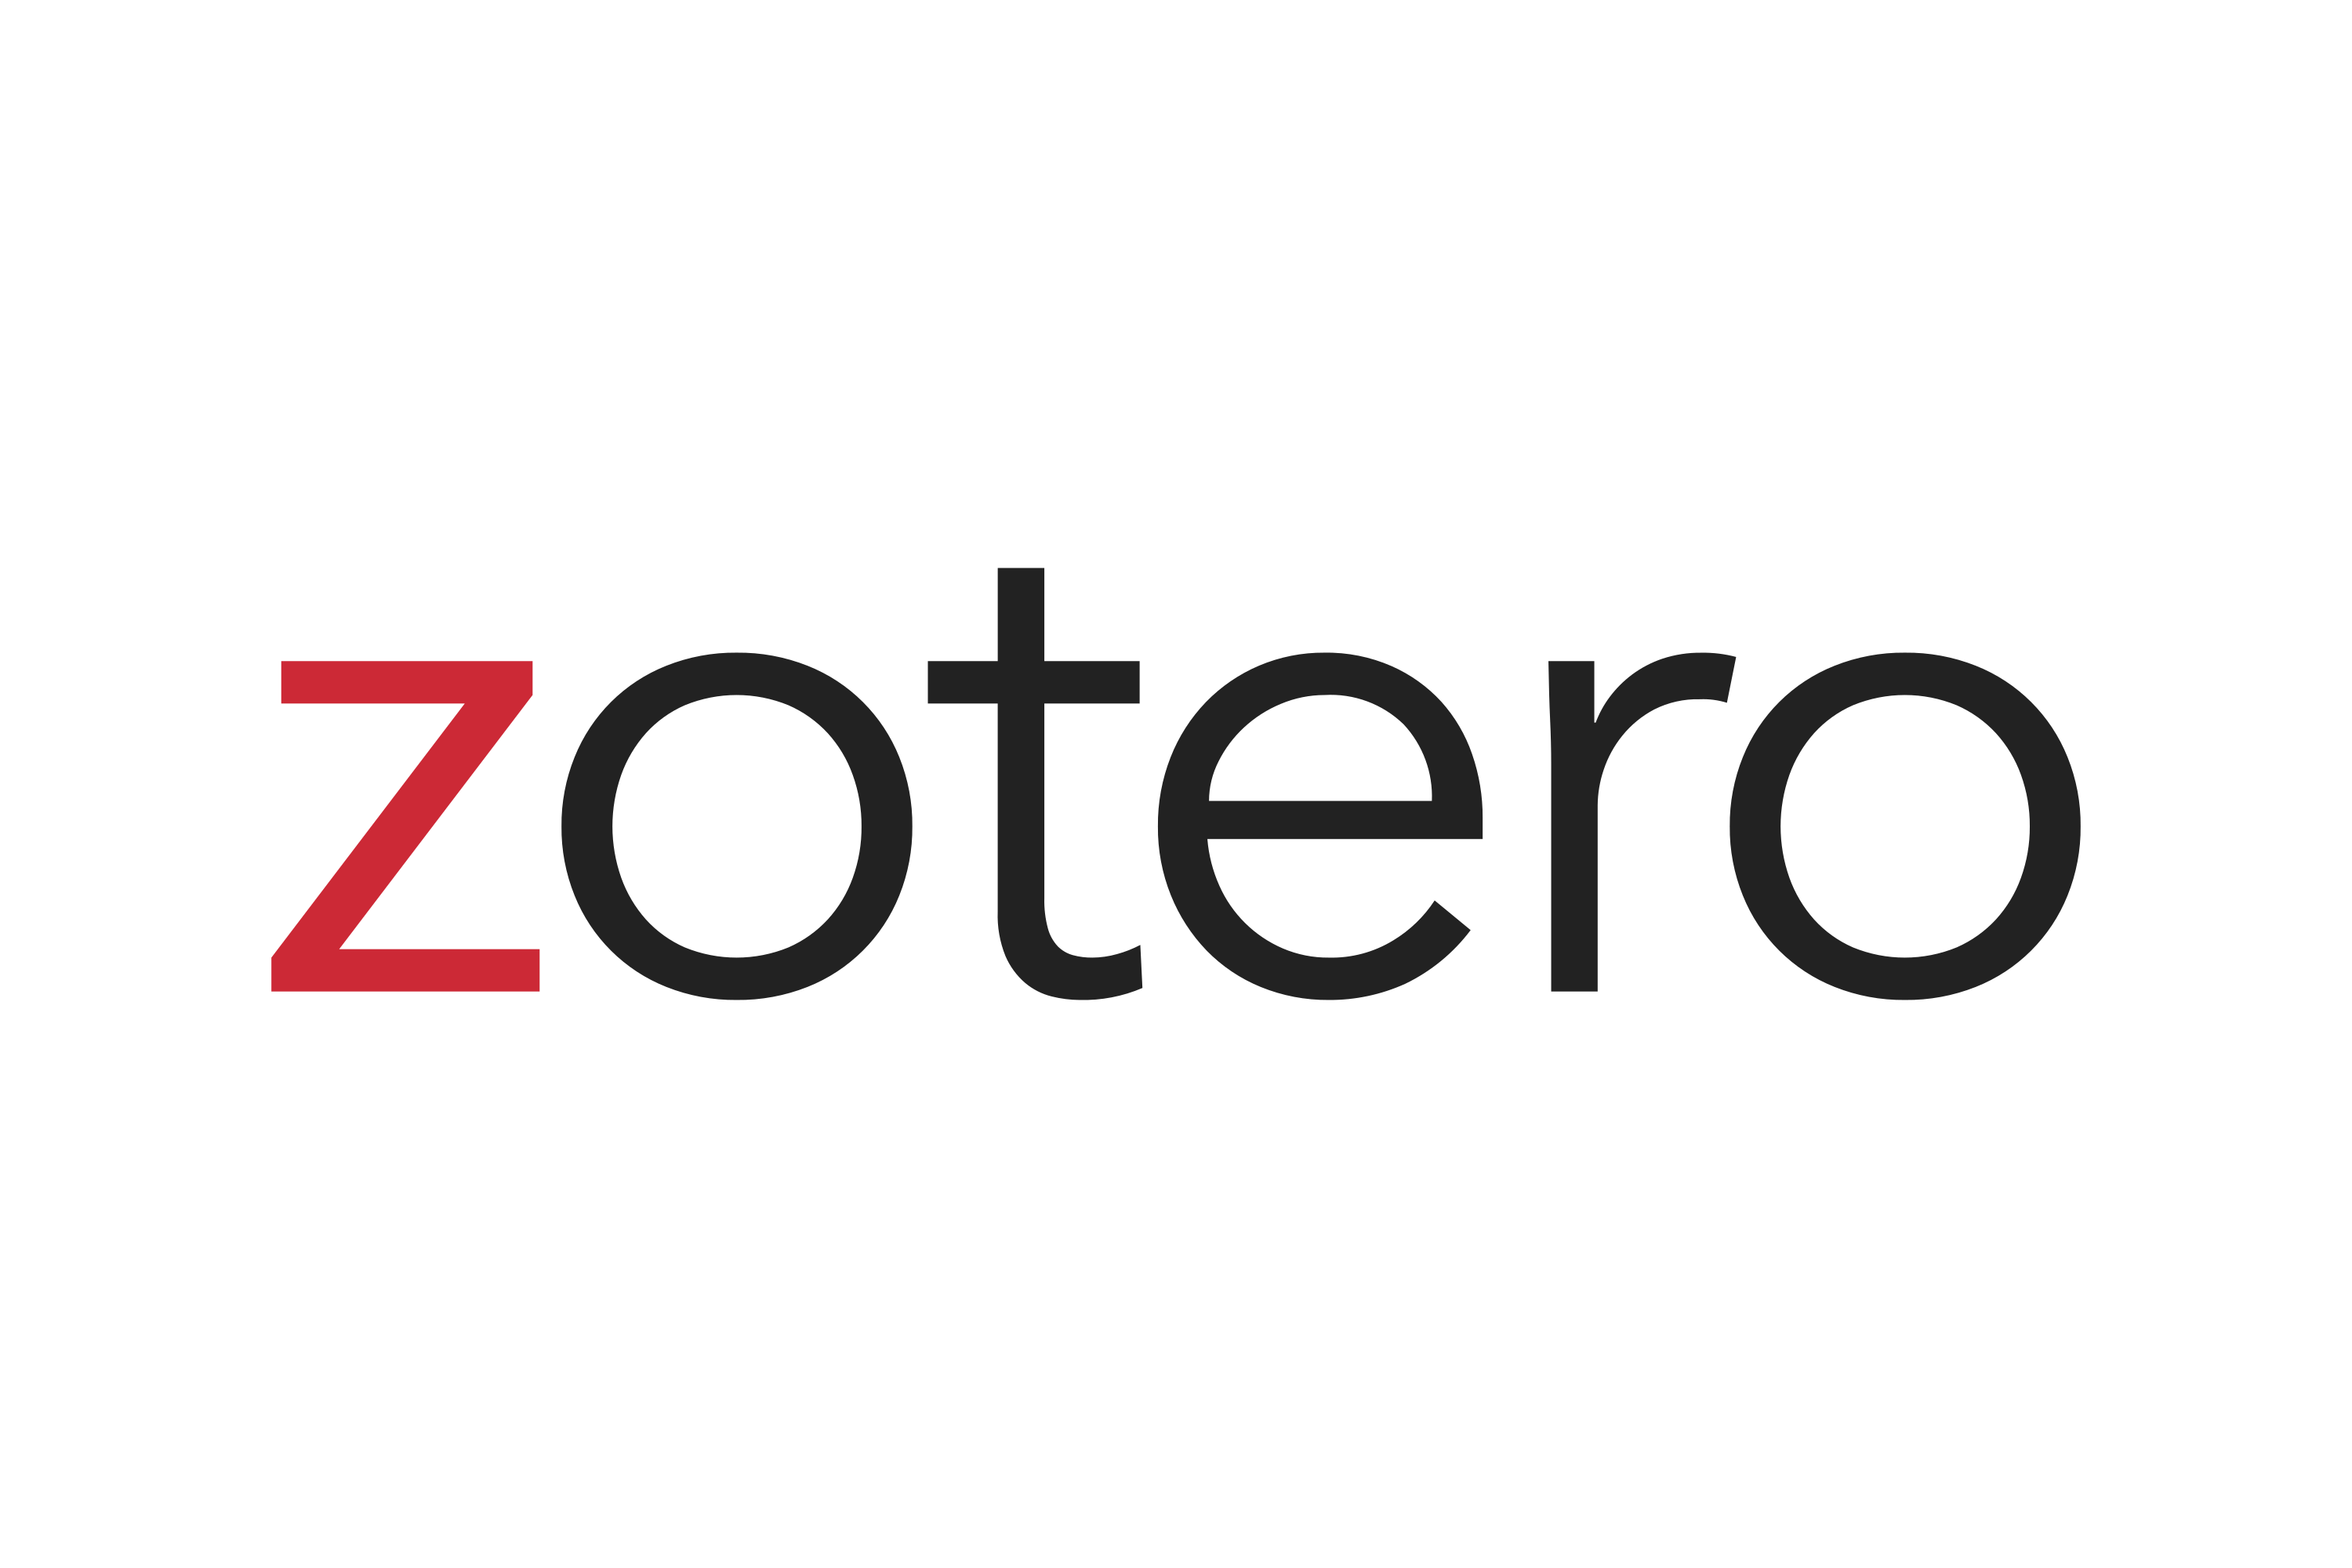 Download Zotero Logo in SVG Vector or PNG File Format - Logo.wine